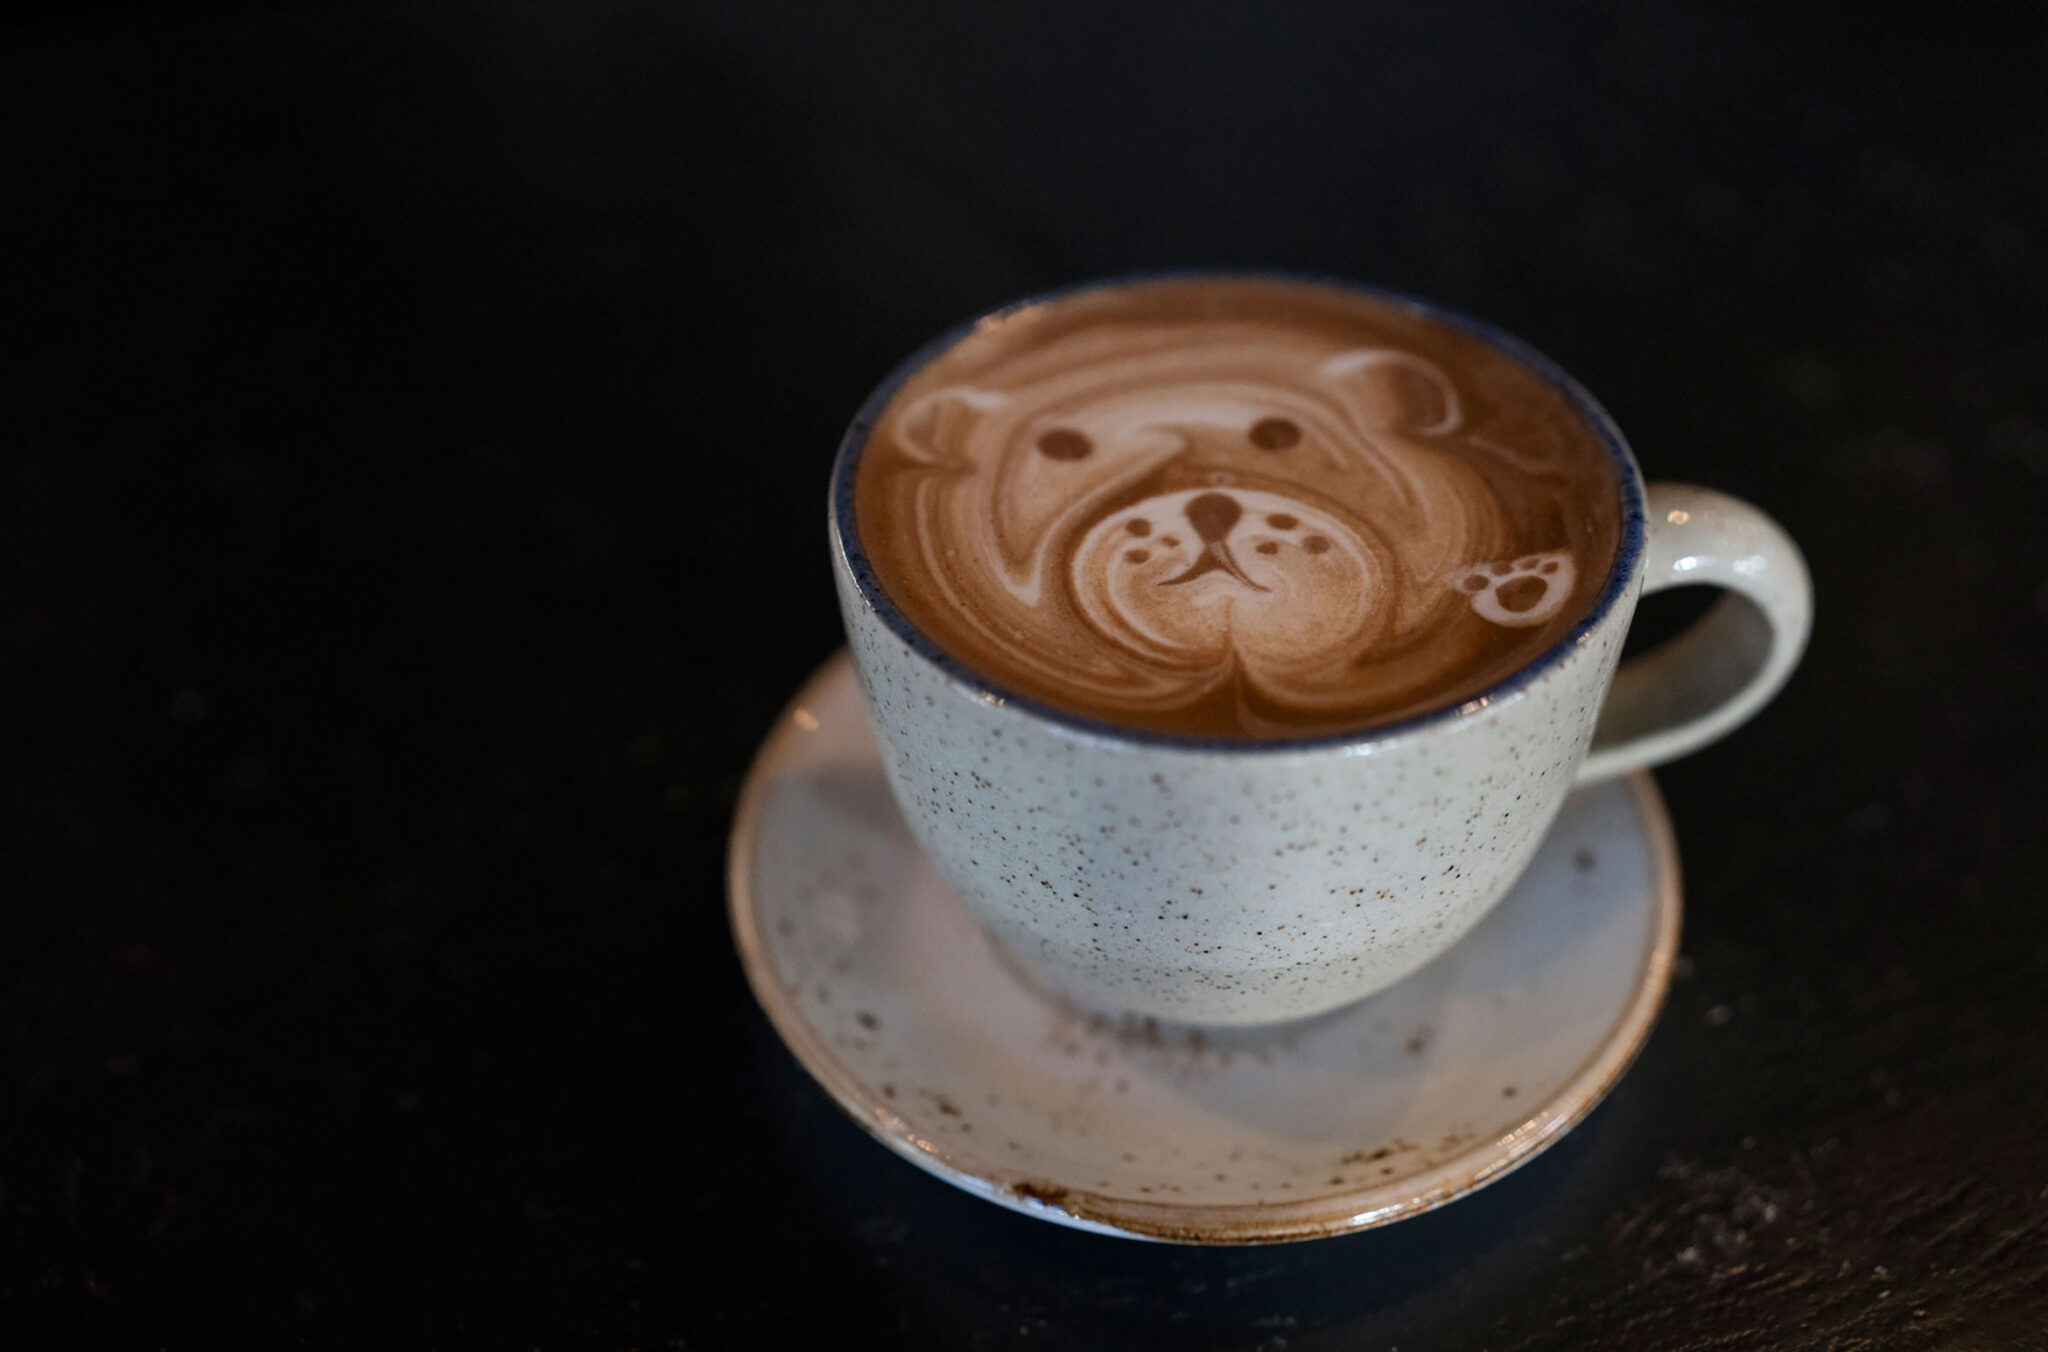 A decadent hot chocolate with bear art in the froth from Fix Cafe in Whistler.